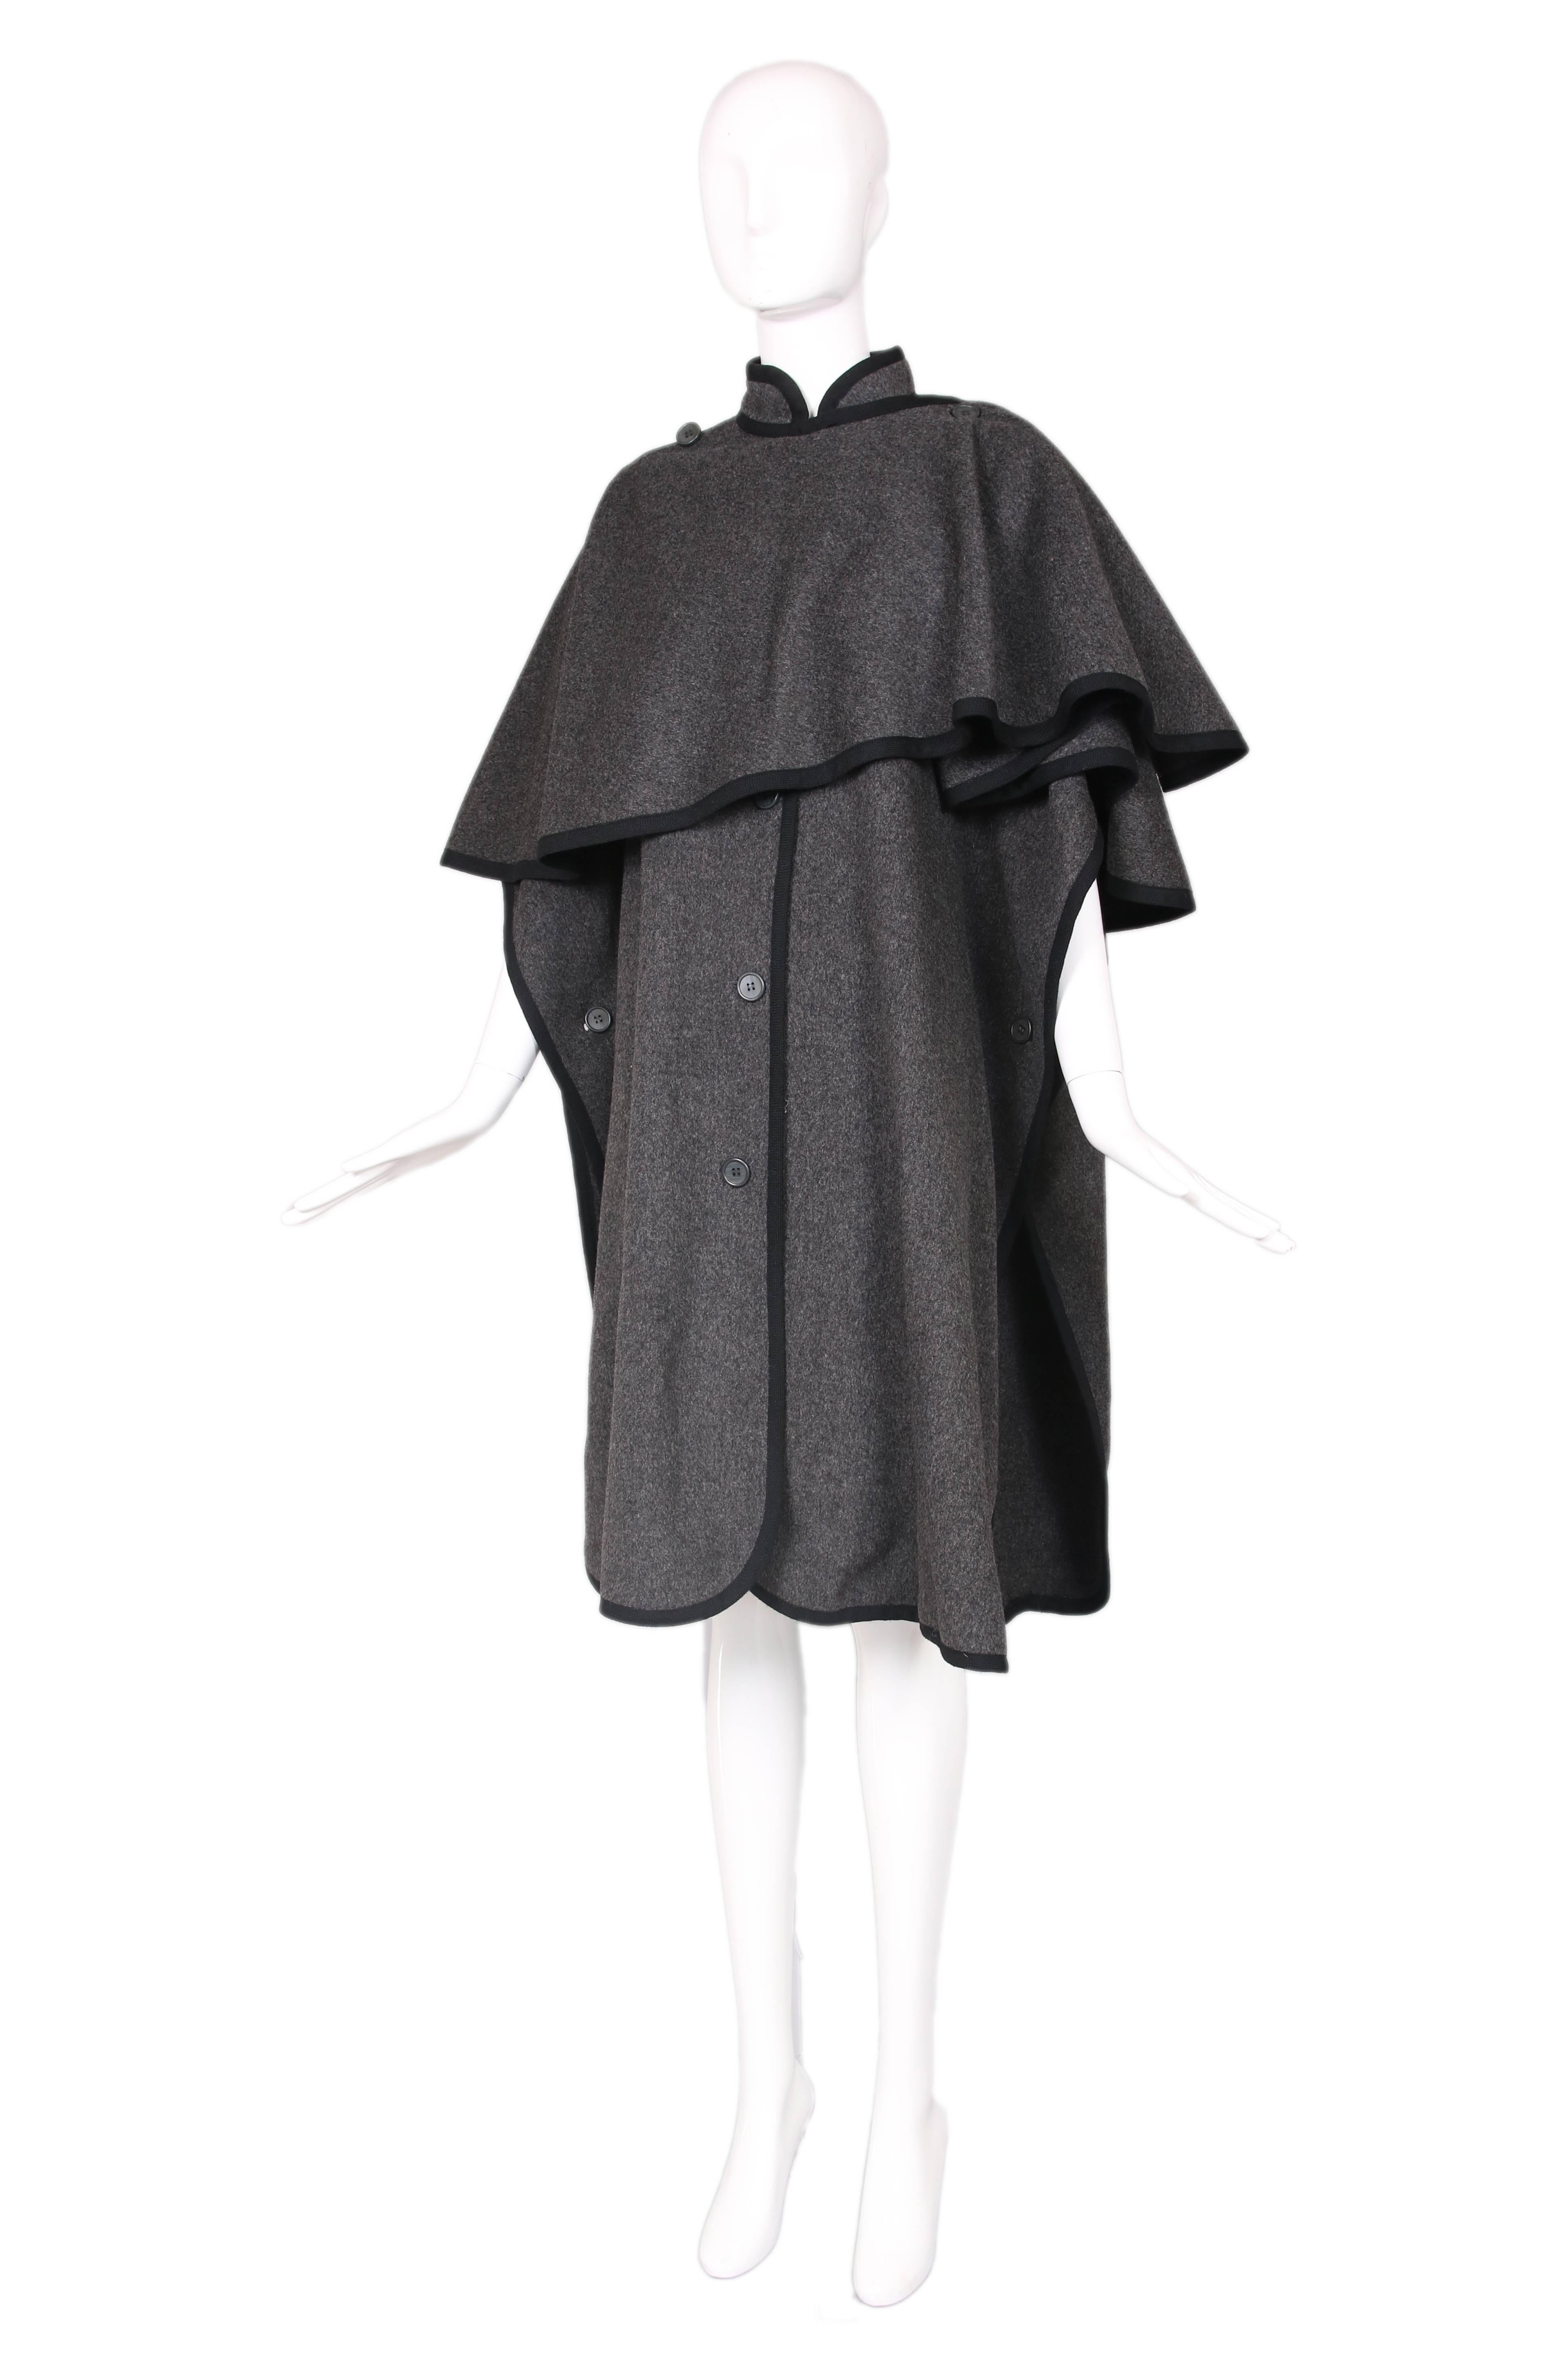 Yves Saint Laurent grey wool cape with black trim and front buttons. Oversized collar can be worn multiple ways. In excellent condition. Size EU 36.
MEASUREMENTS:
Length - 42